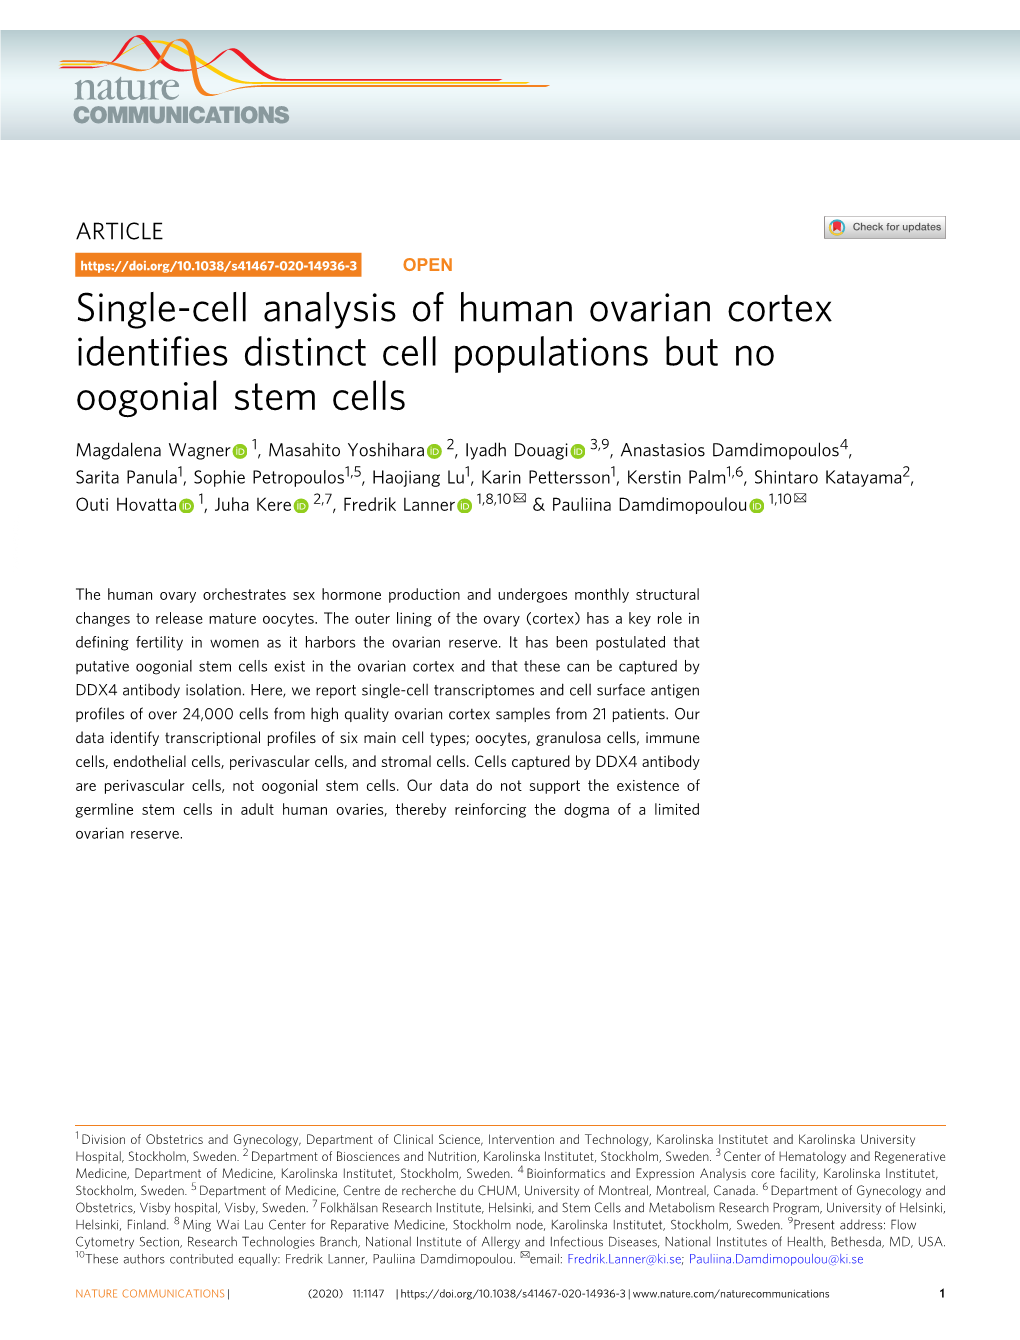 S41467-020-14936-3 OPEN Single-Cell Analysis of Human Ovarian Cortex Identiﬁes Distinct Cell Populations but No Oogonial Stem Cells